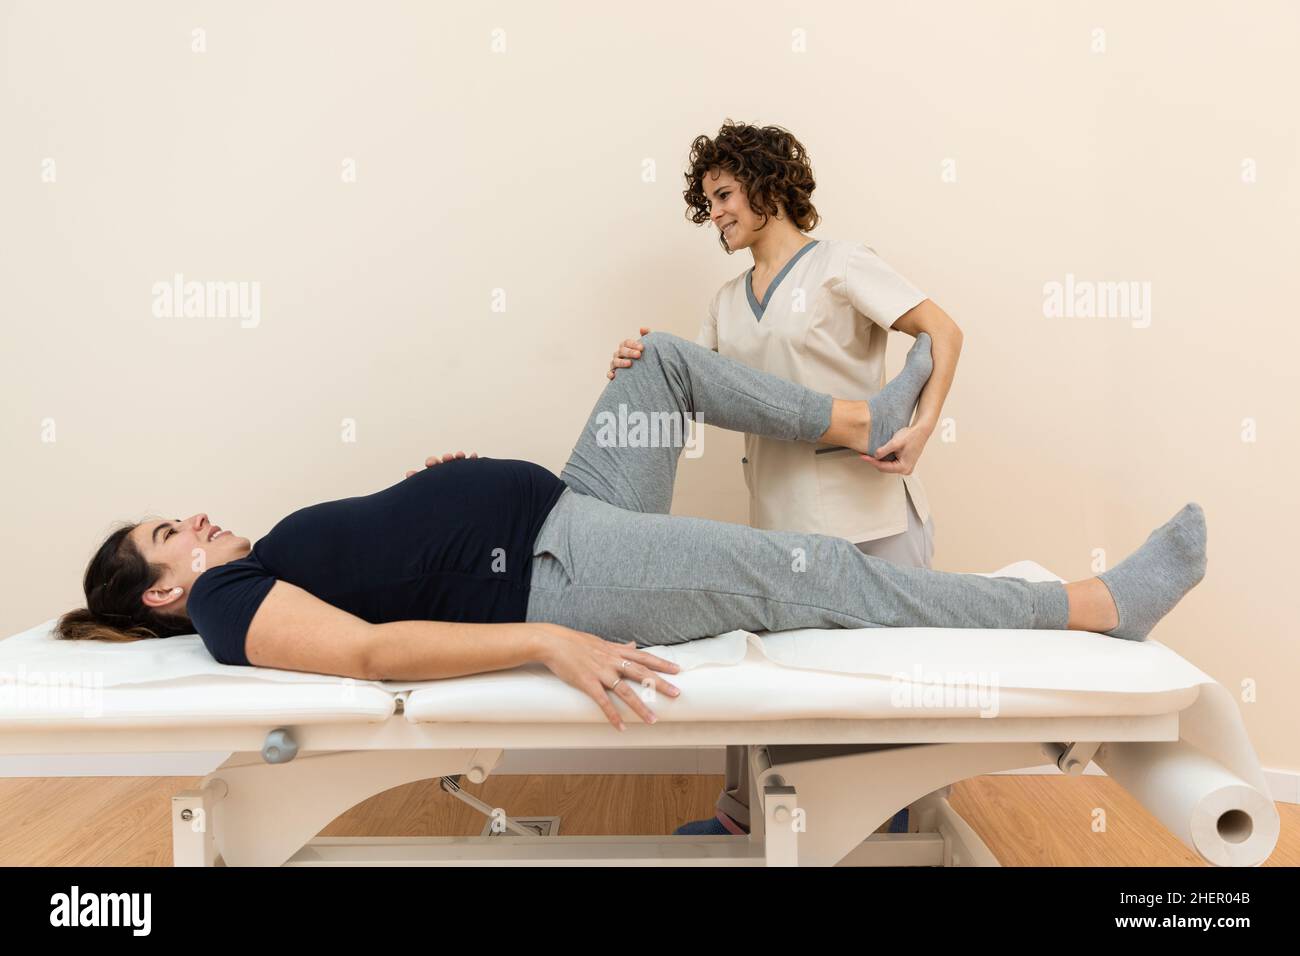 A pregnant woman lying on a massage table while a physiotherapist massages her legs at a health center Stock Photo